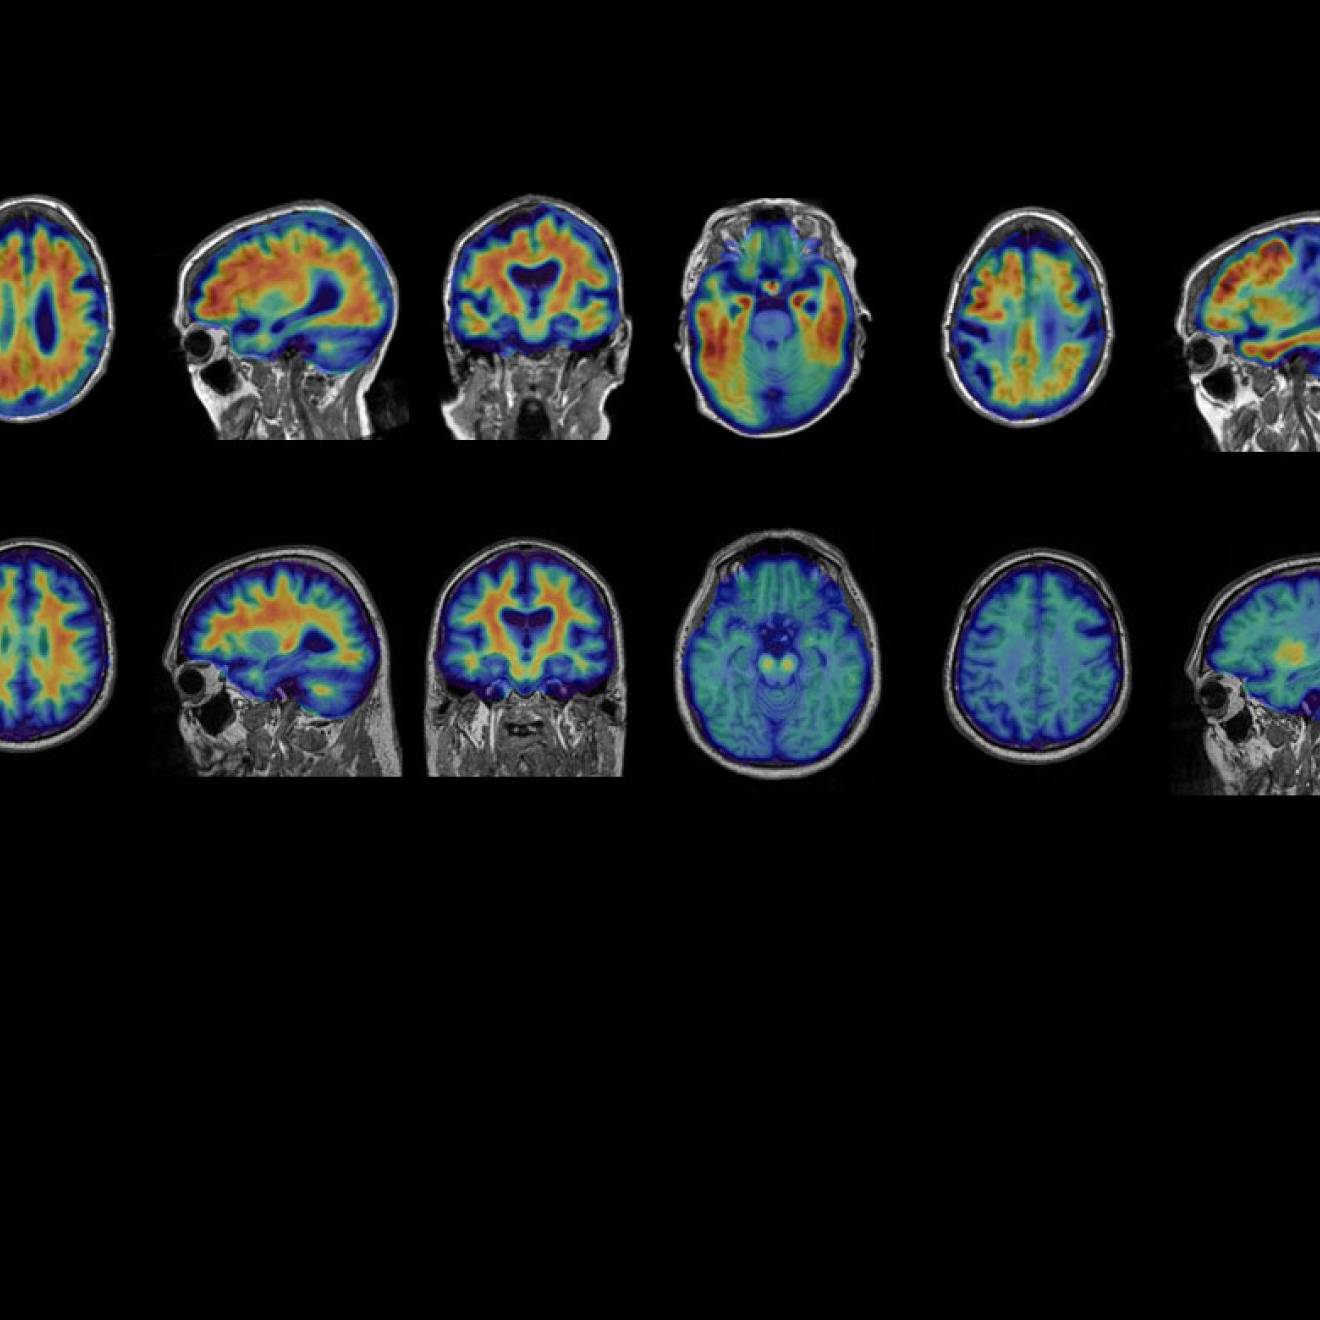 A set of 16 brain PET scans, with orange areas representing Alzheimer's progression